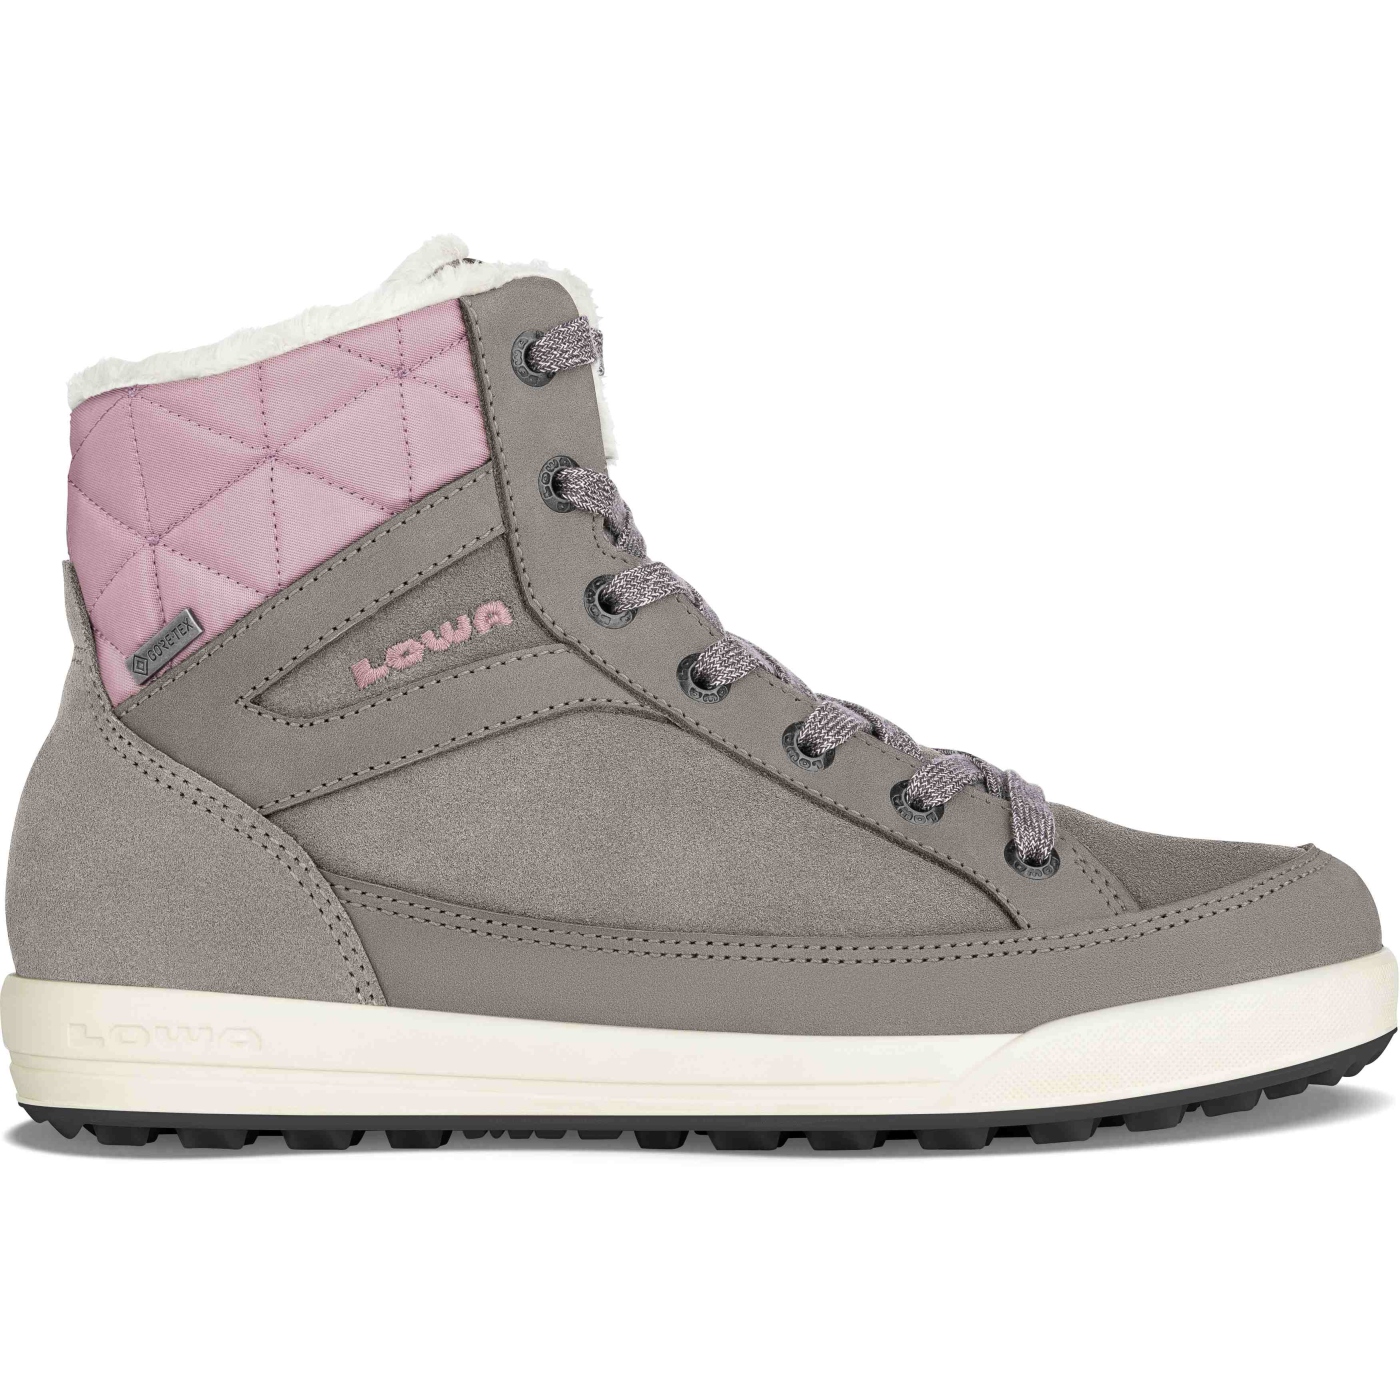 Picture of LOWA Casara GTX Winter Shoes Women - stone/rose